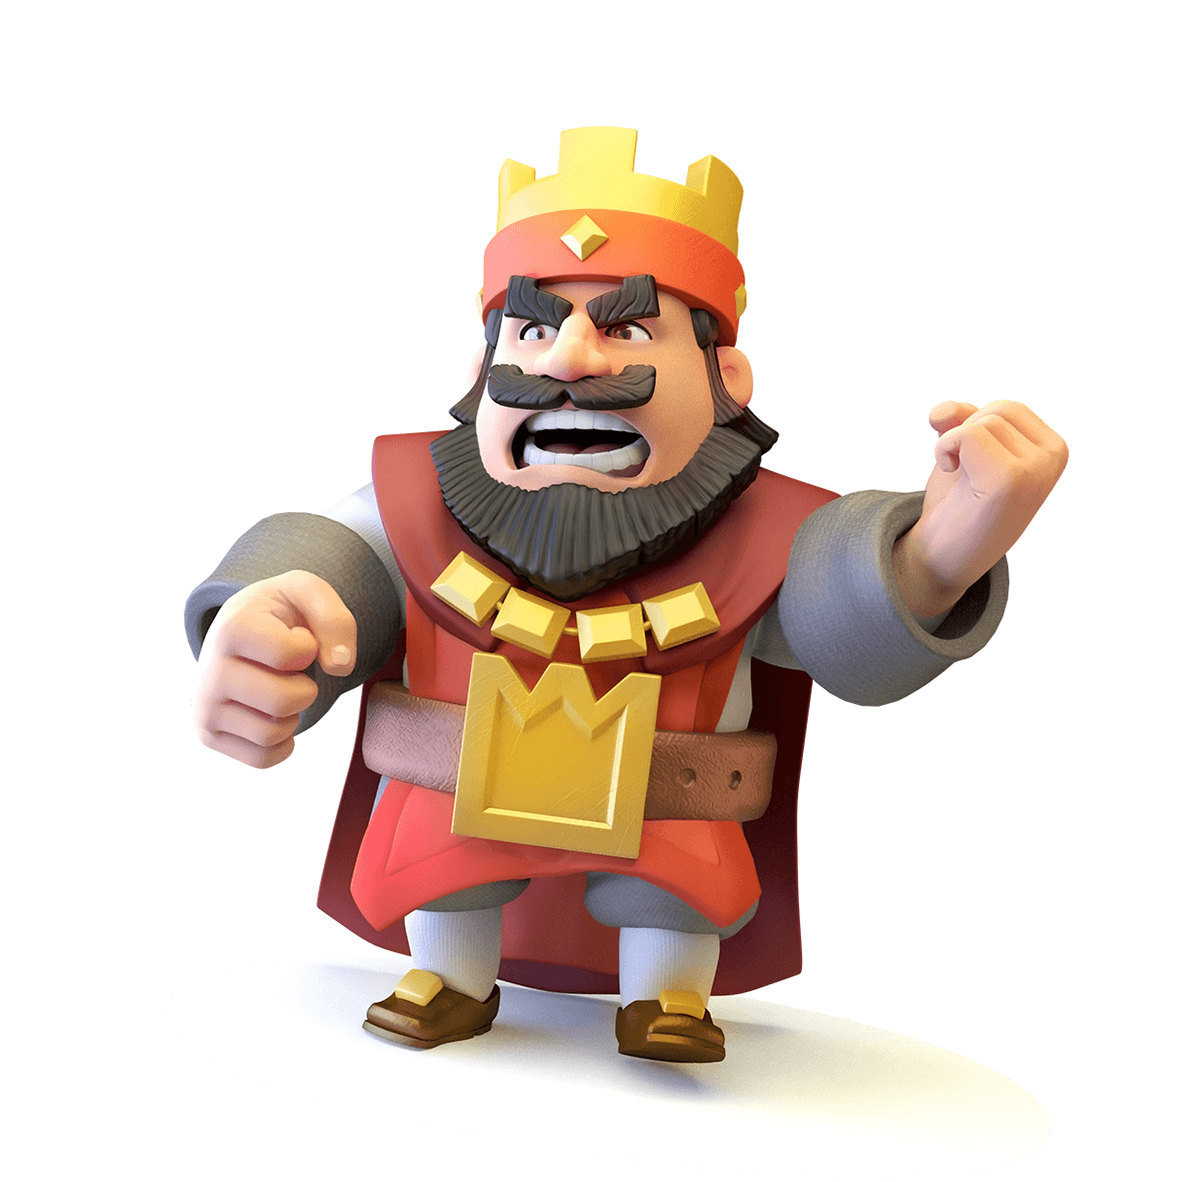 King from Clash Royale. character. Clash